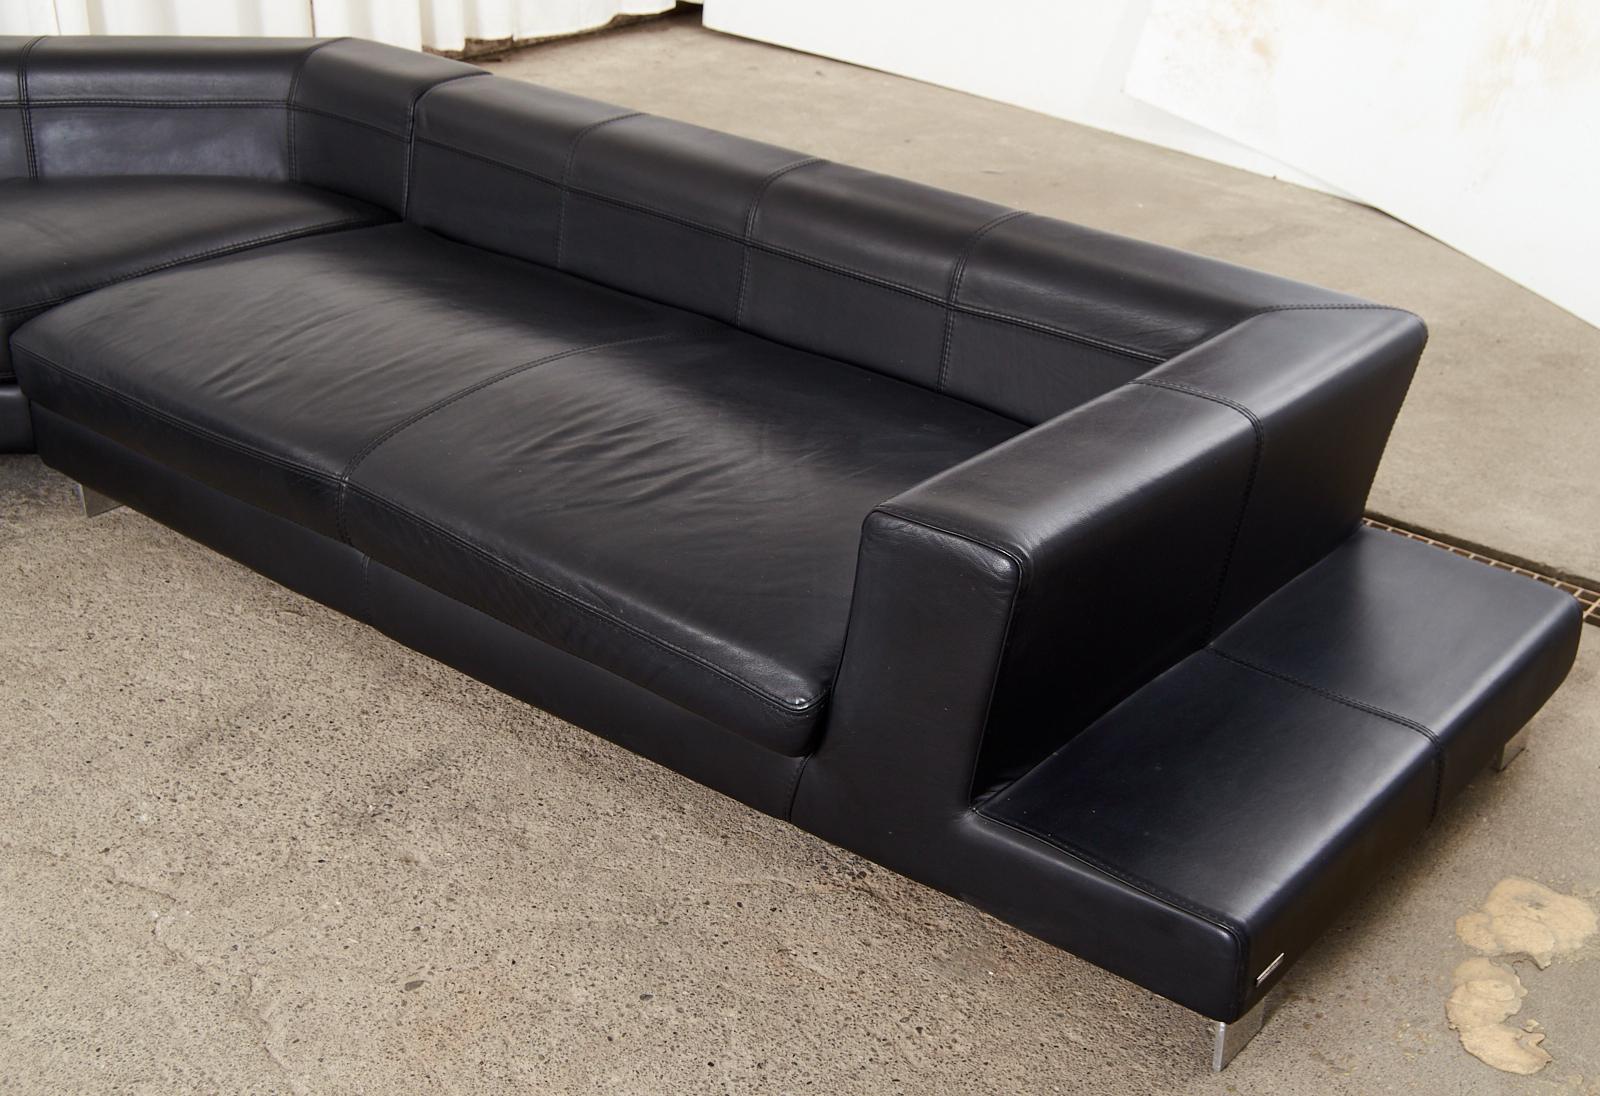 Steel Roche Bobois Leather Sectional Sofa with Ottomans